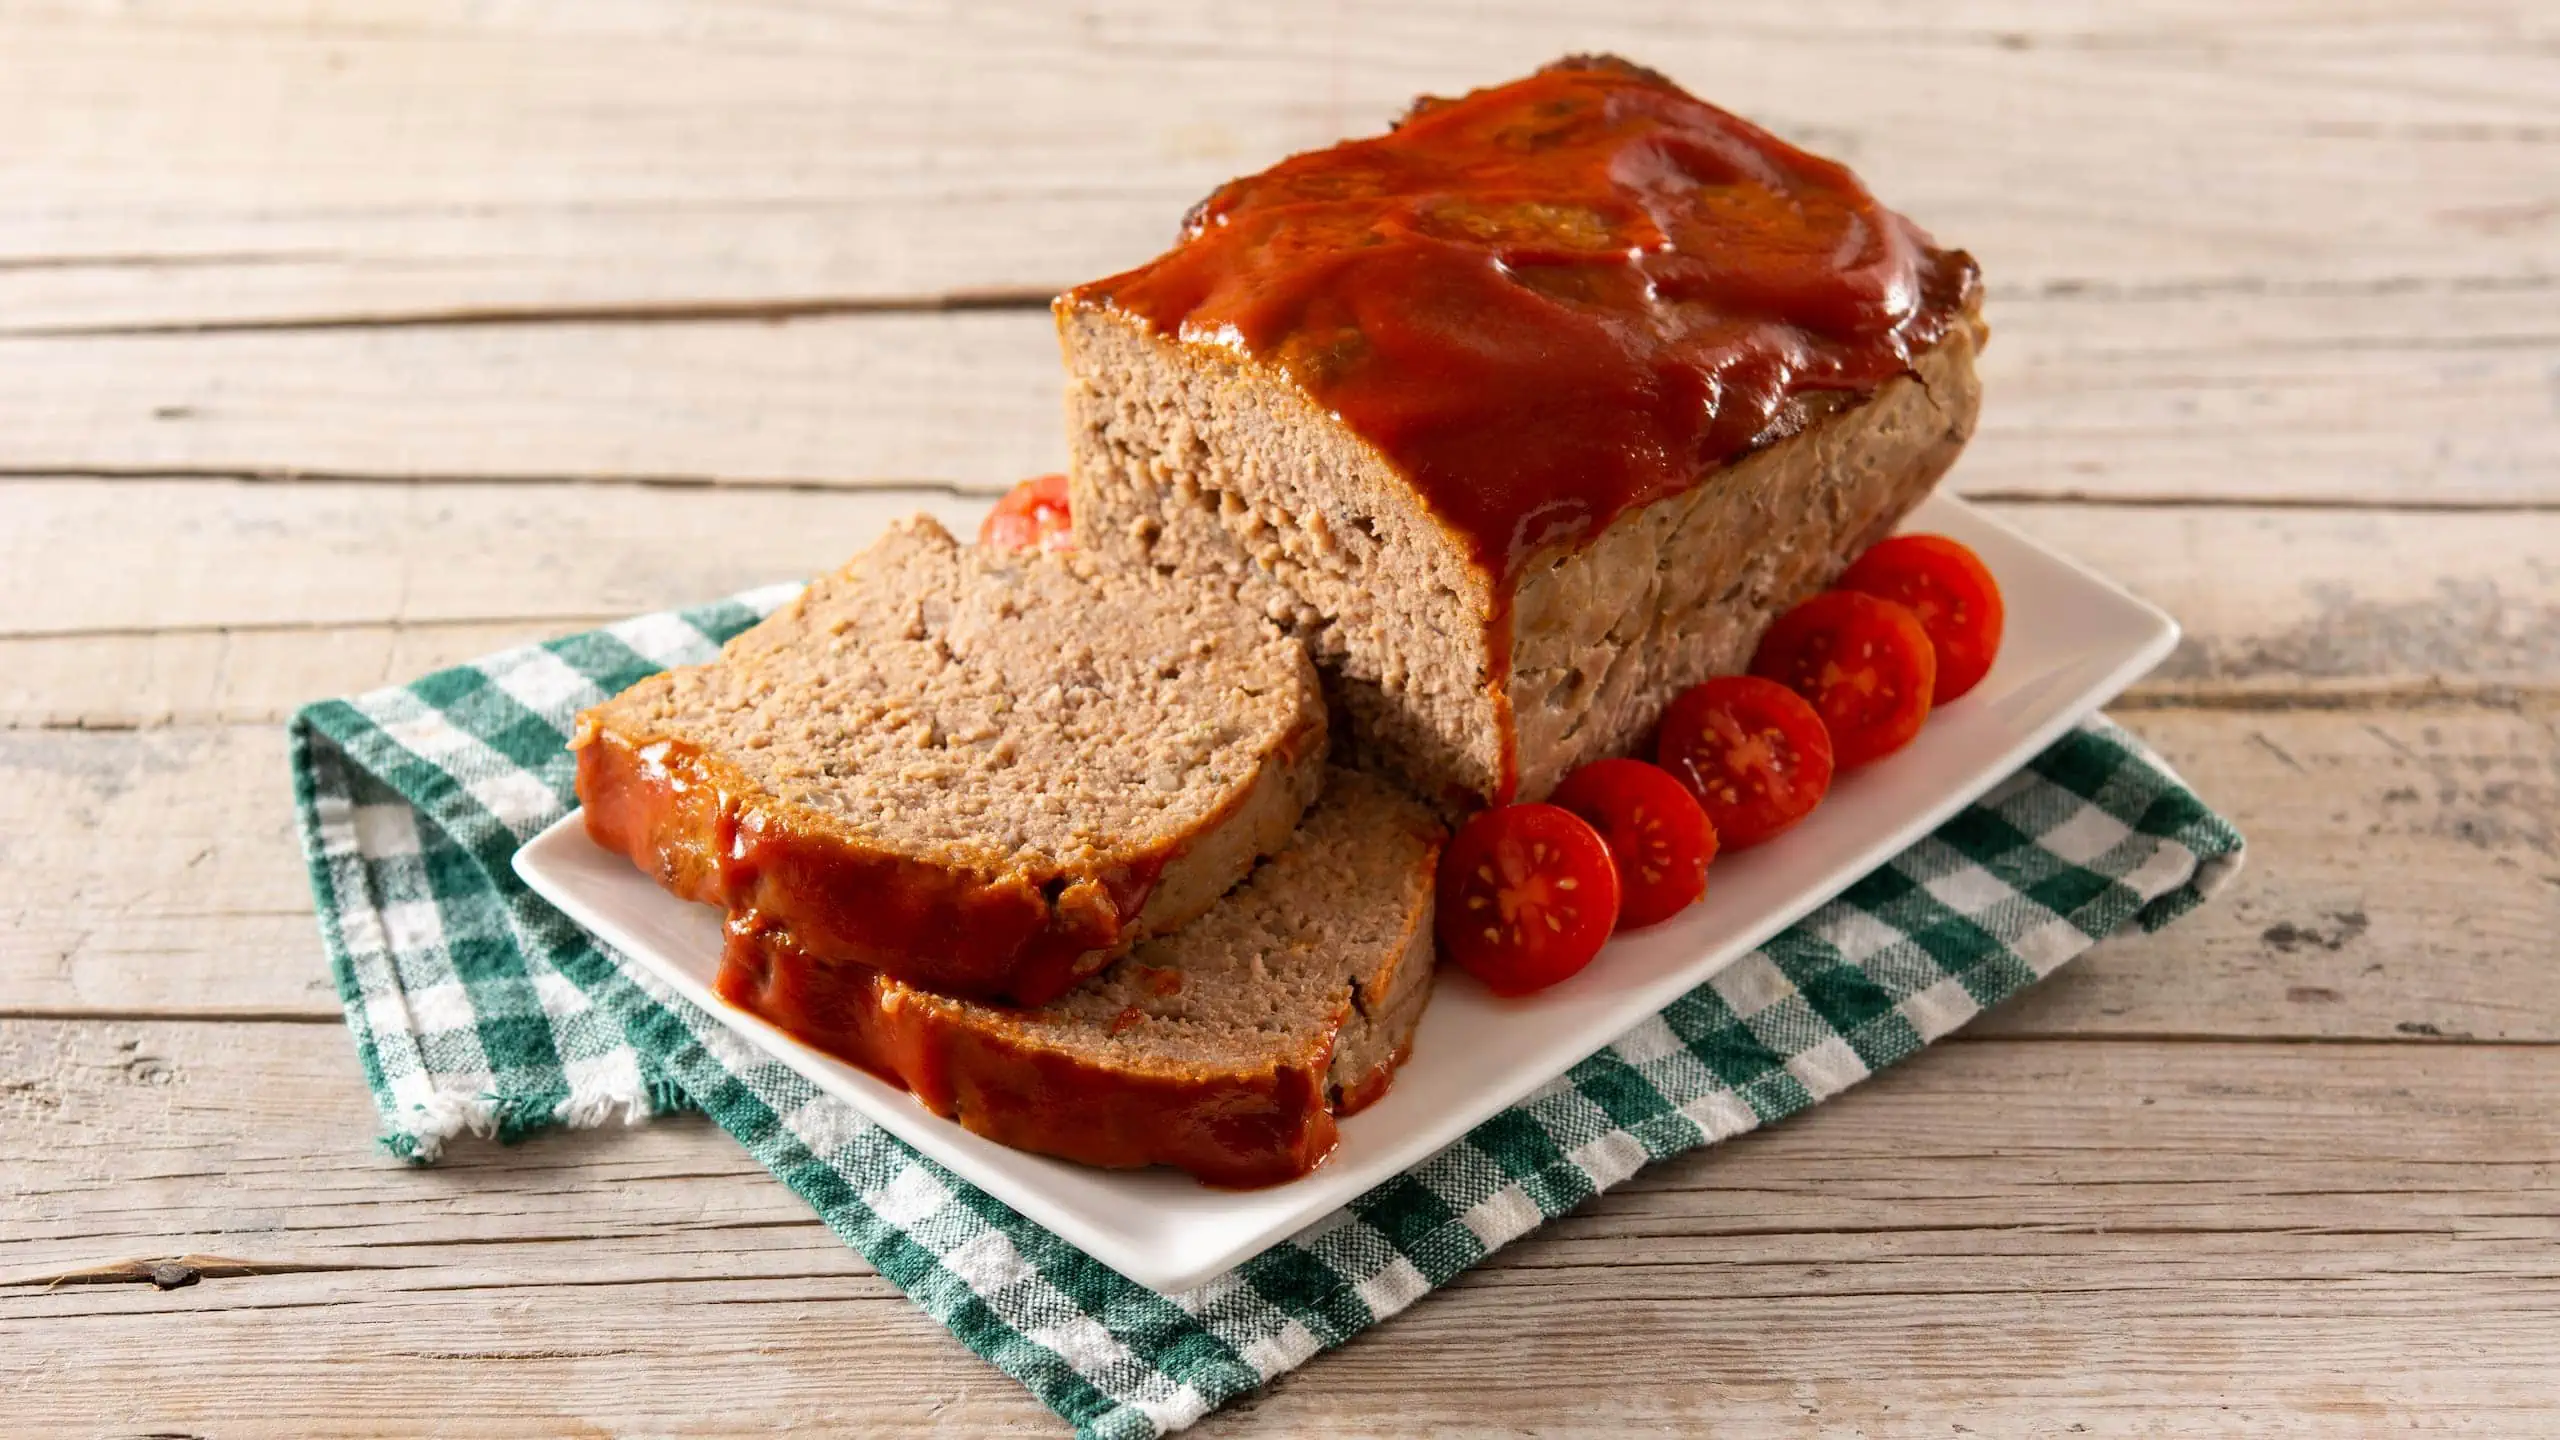 Traditional American Brenda Gantt meatloaf with tomato sauce